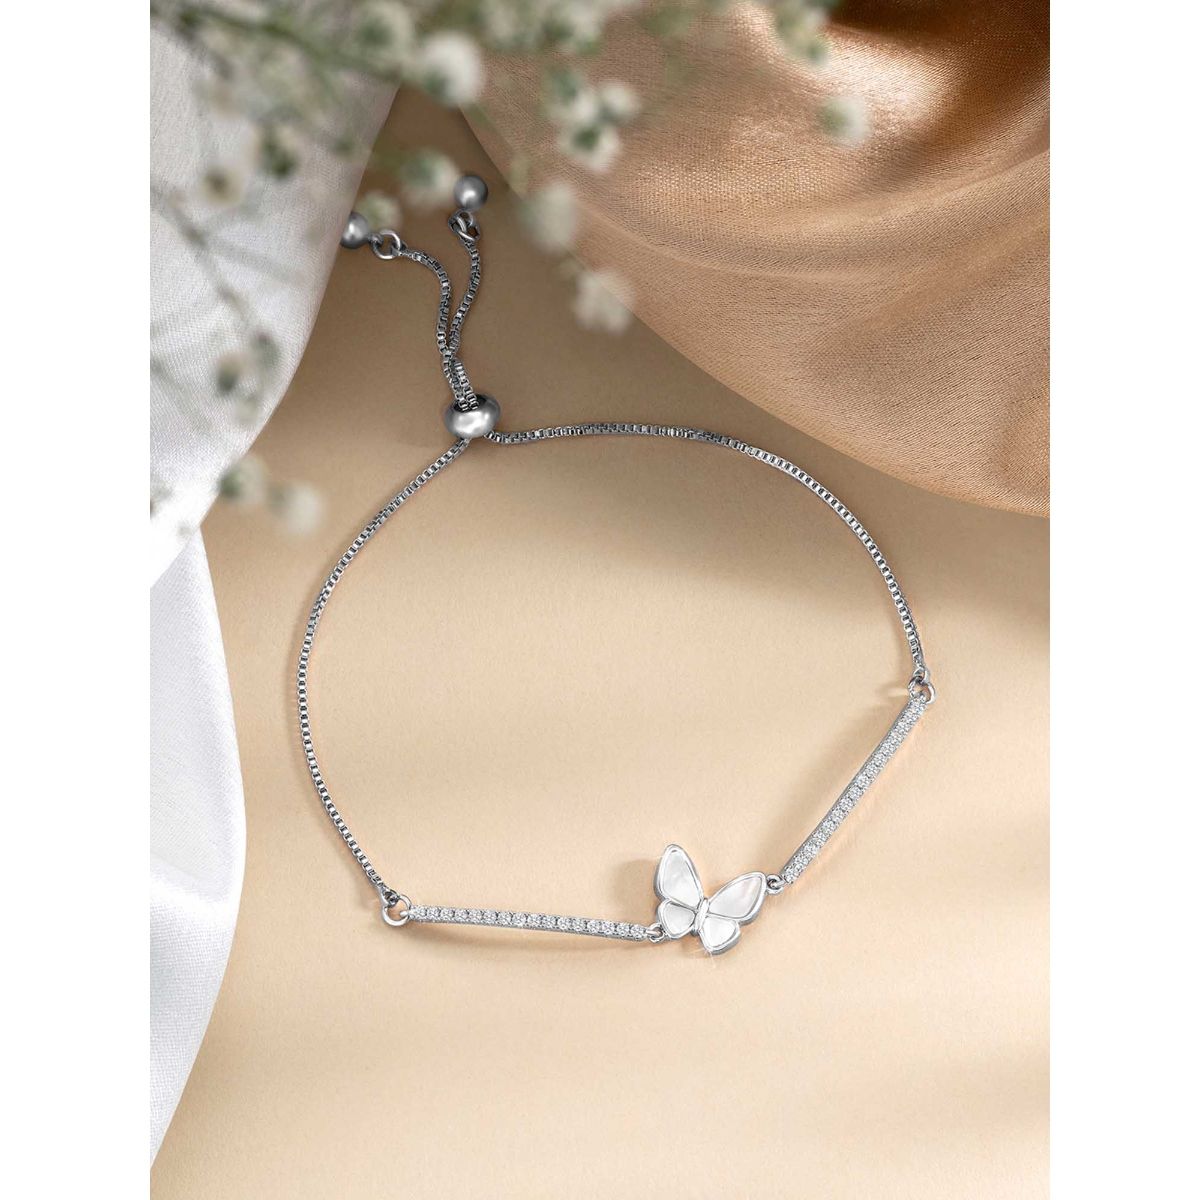 Peora Silver Plated CZ Mother of Pearl Butterfly Shape Adjustable Bracelet  for Women